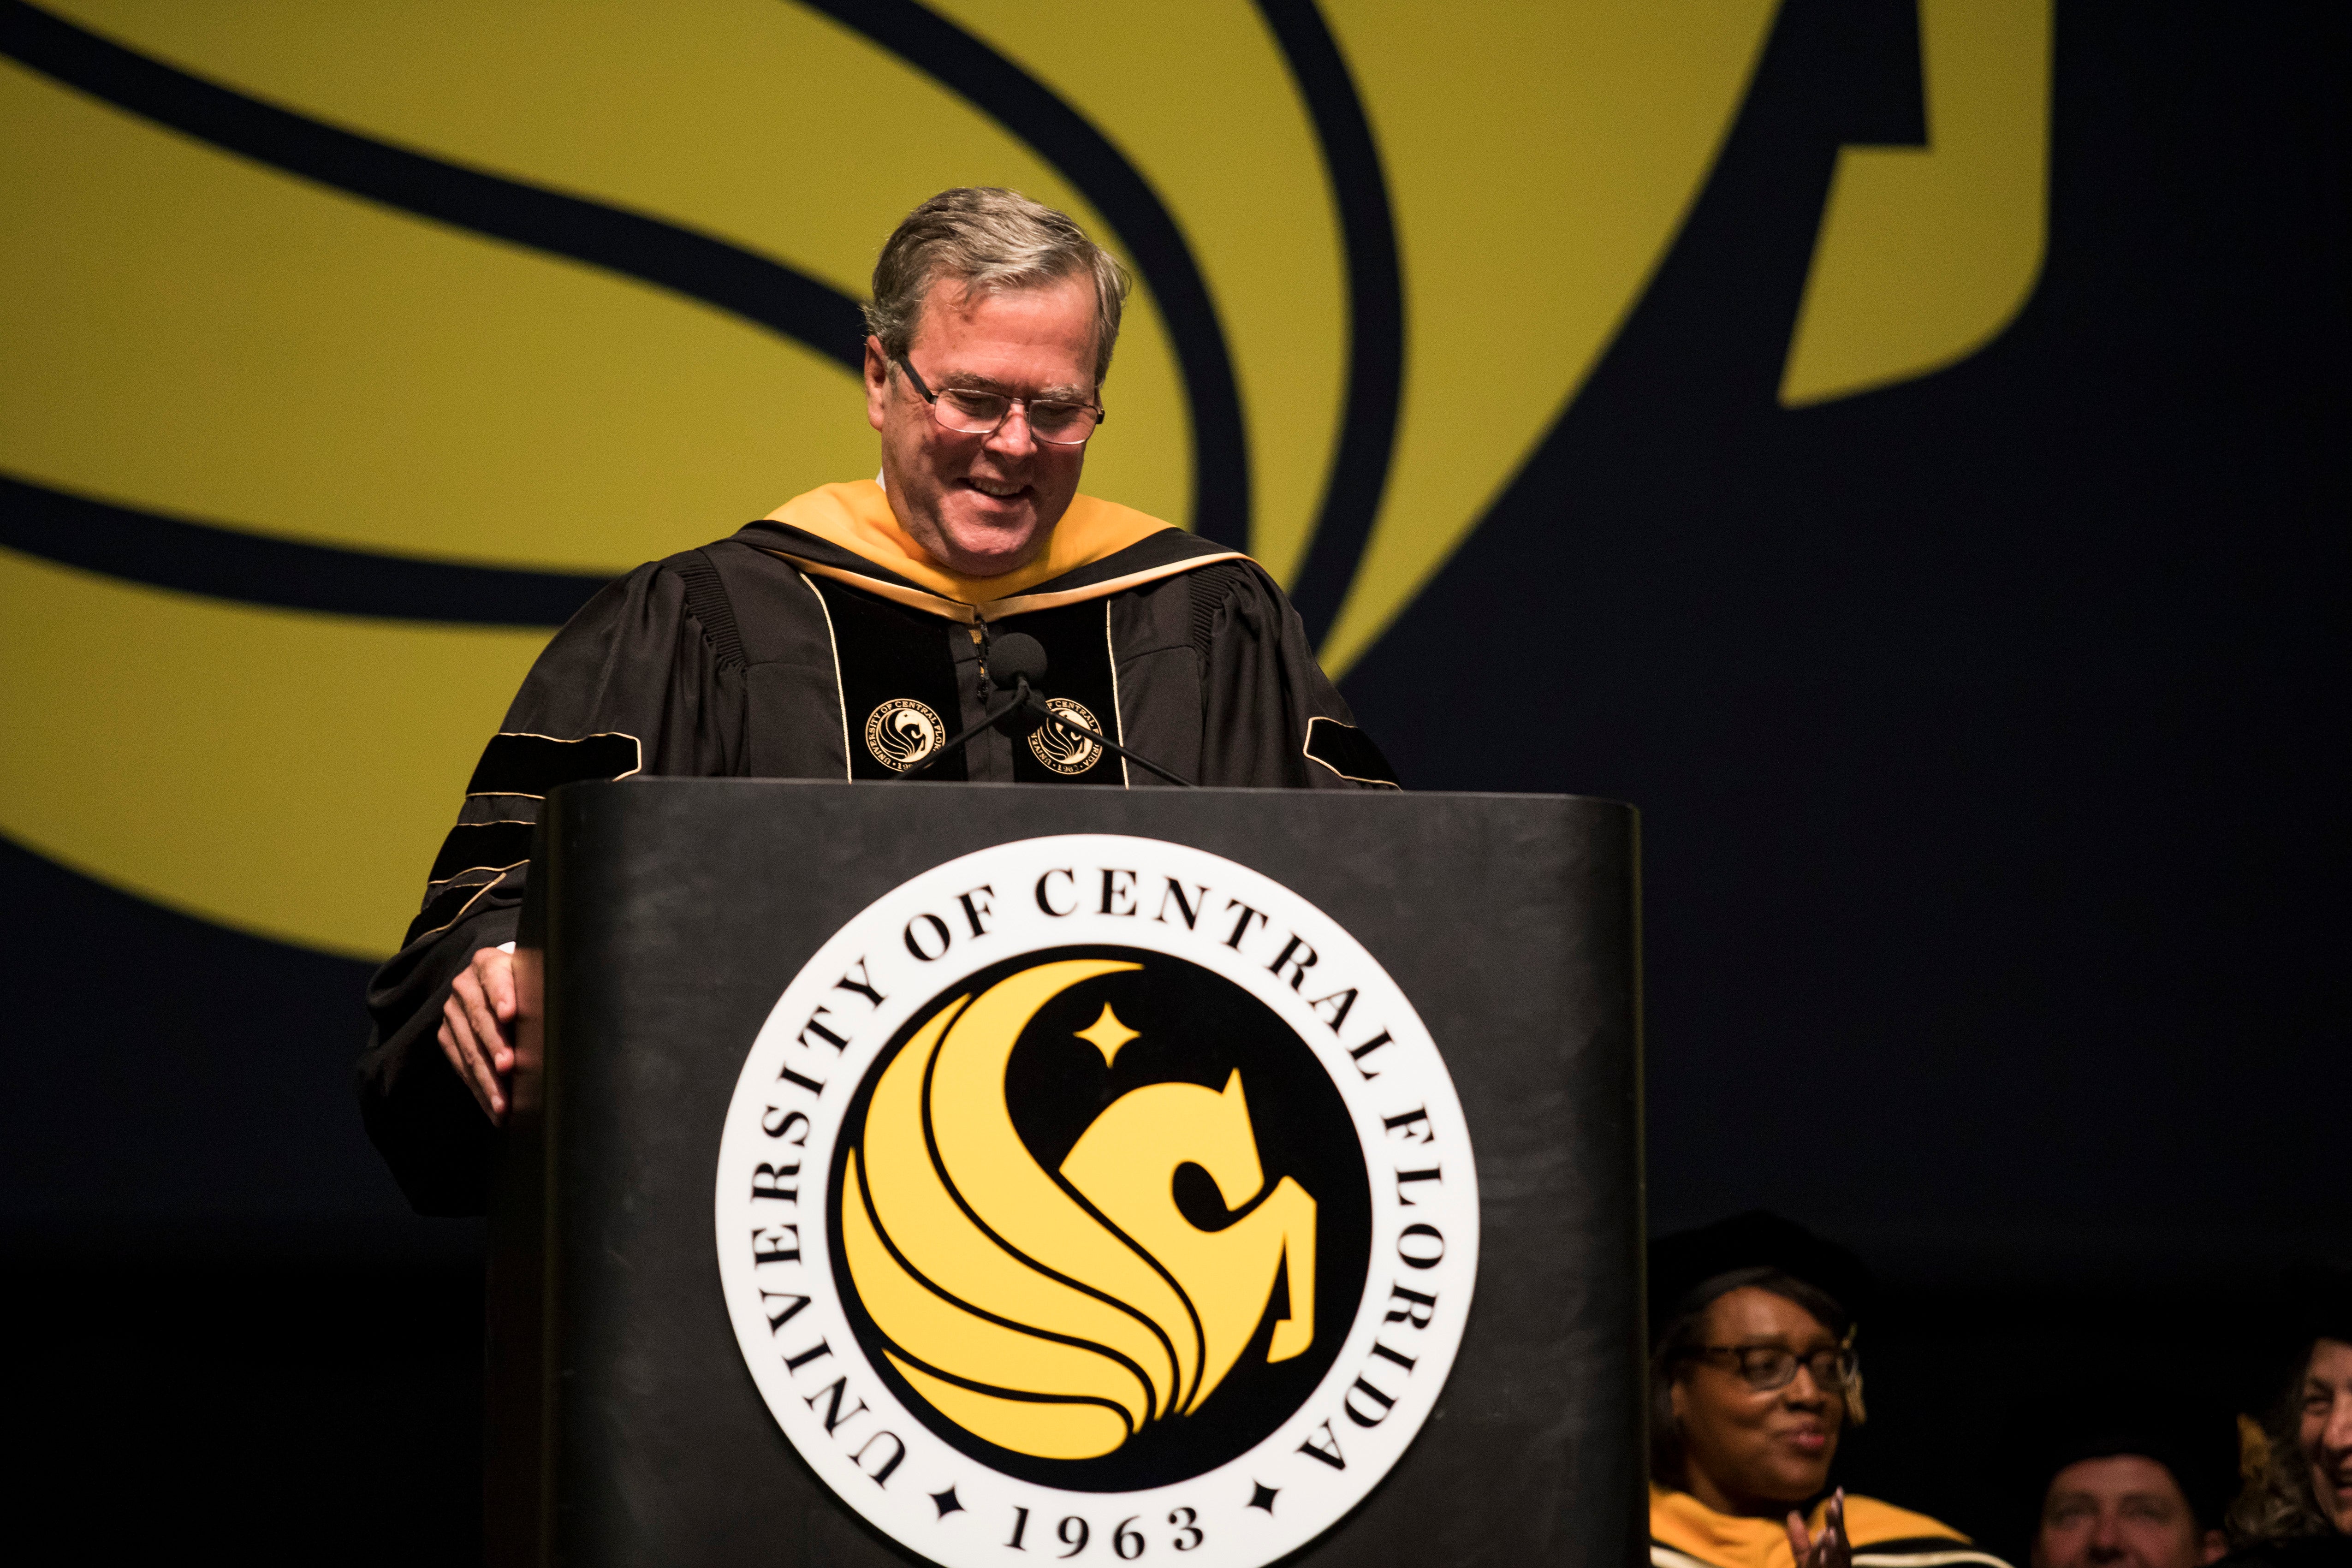 Former Florida Governor Jeb Bush wears a graduation gown as he stands behind a podium with the University of Central Florida Pegasus emblem on it.